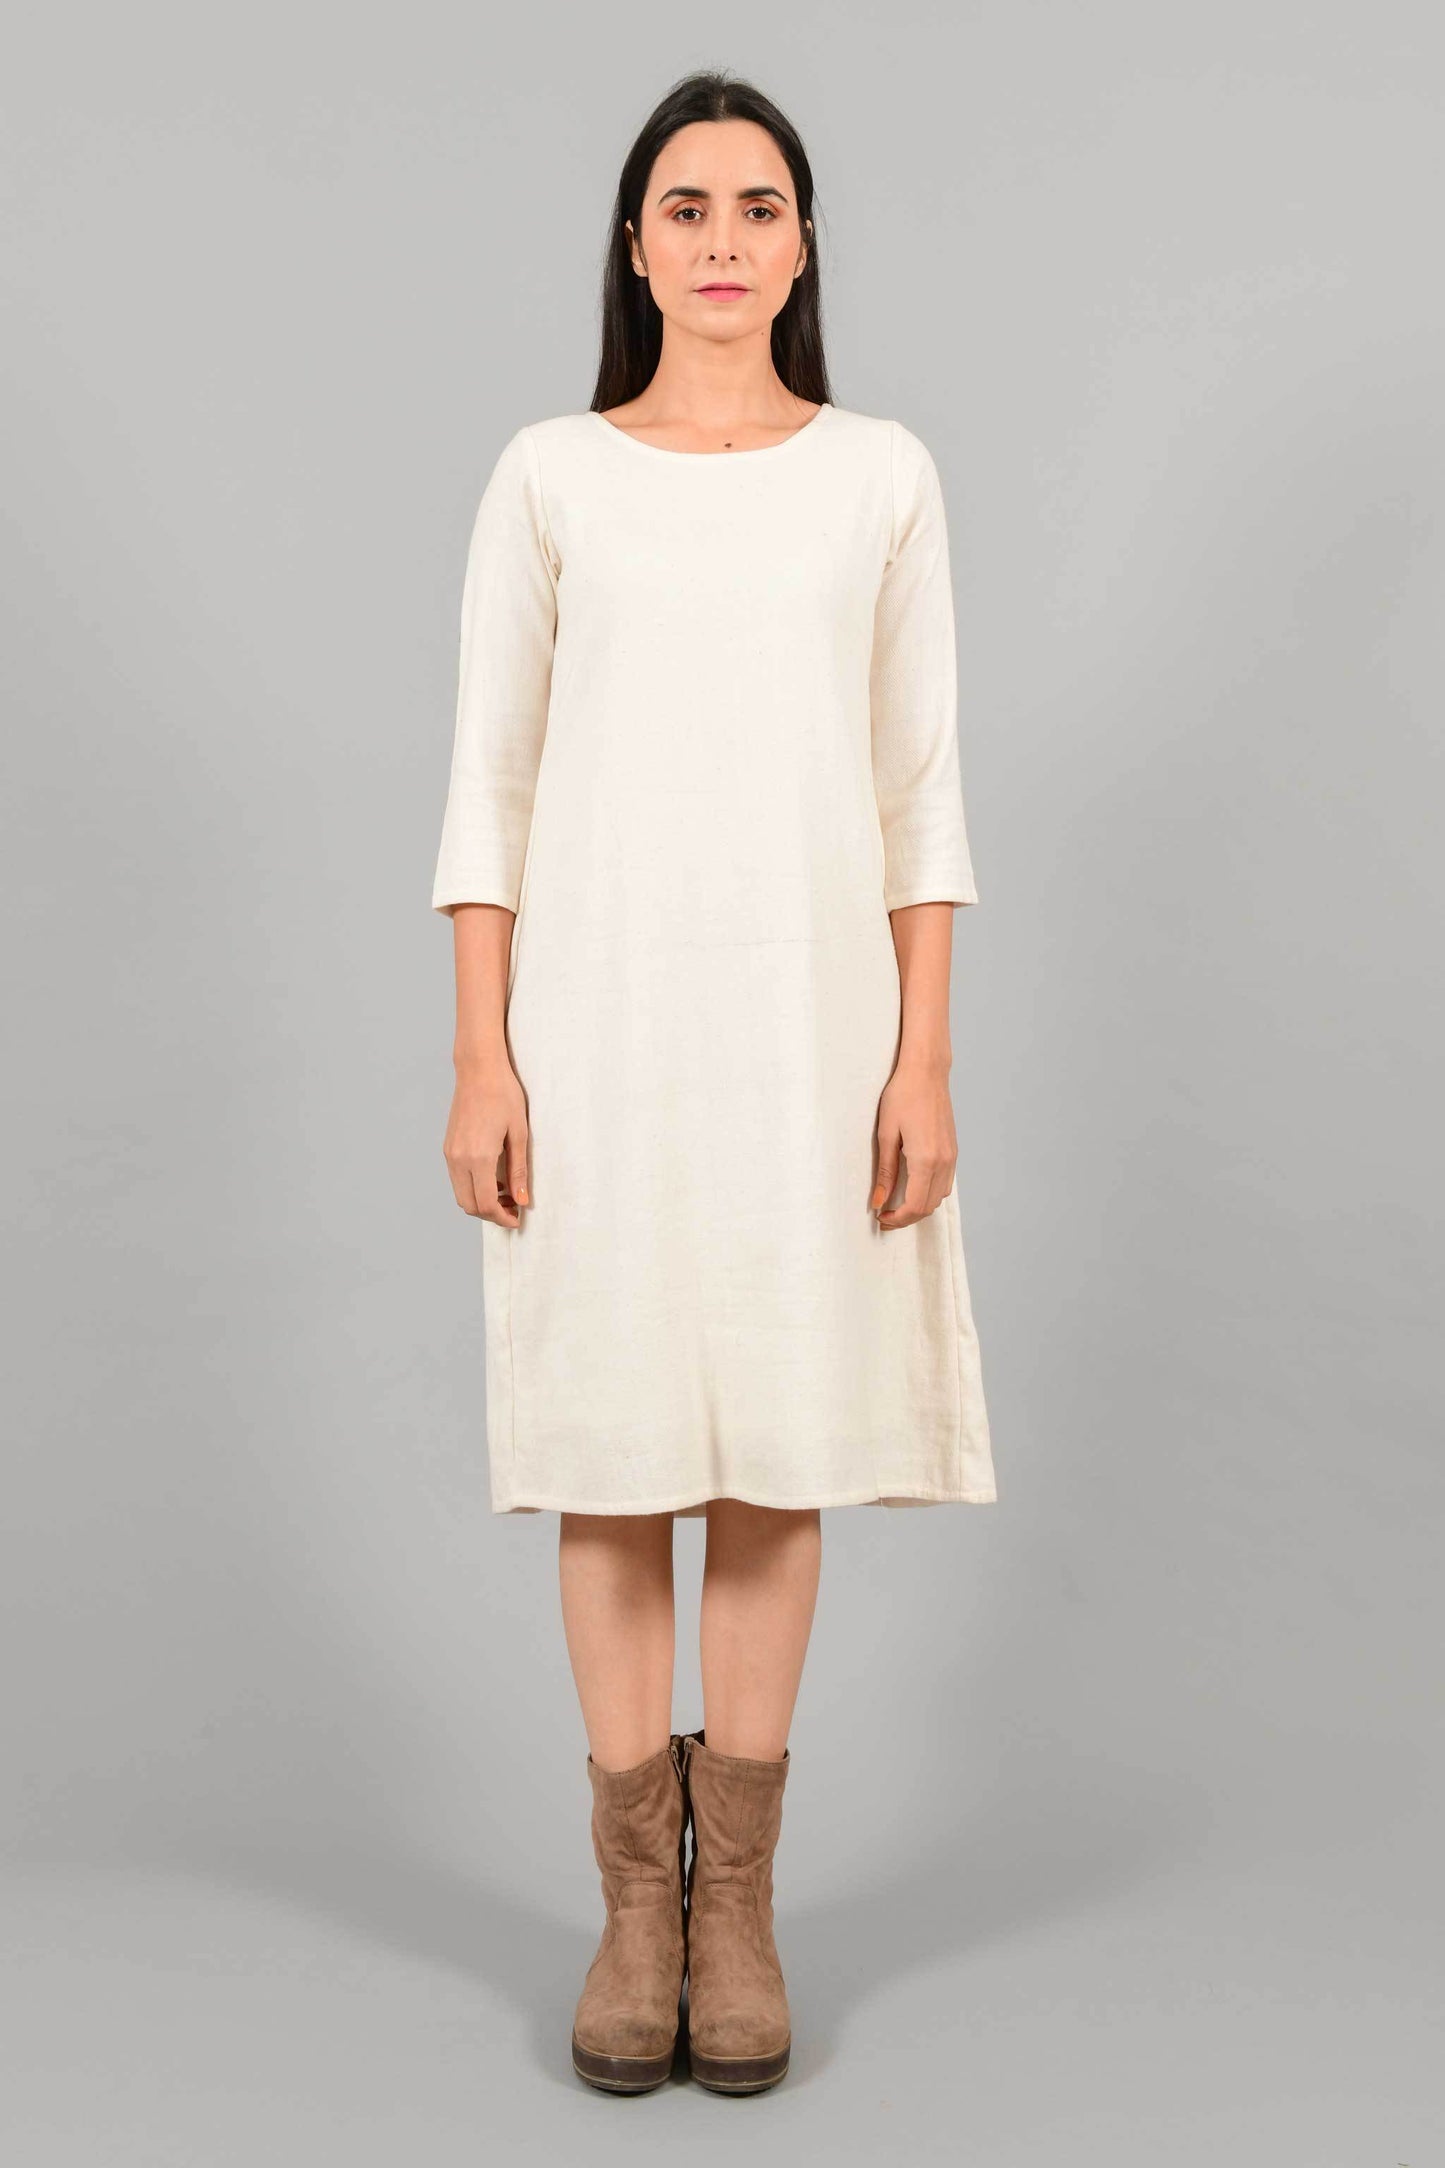 Front pose of an Indian female womenswear fashion model in an off-white Cashmere Cotton A-line Dress with box pleat on the back made using handspun and handwoven khadi cotton by Cotton Rack.